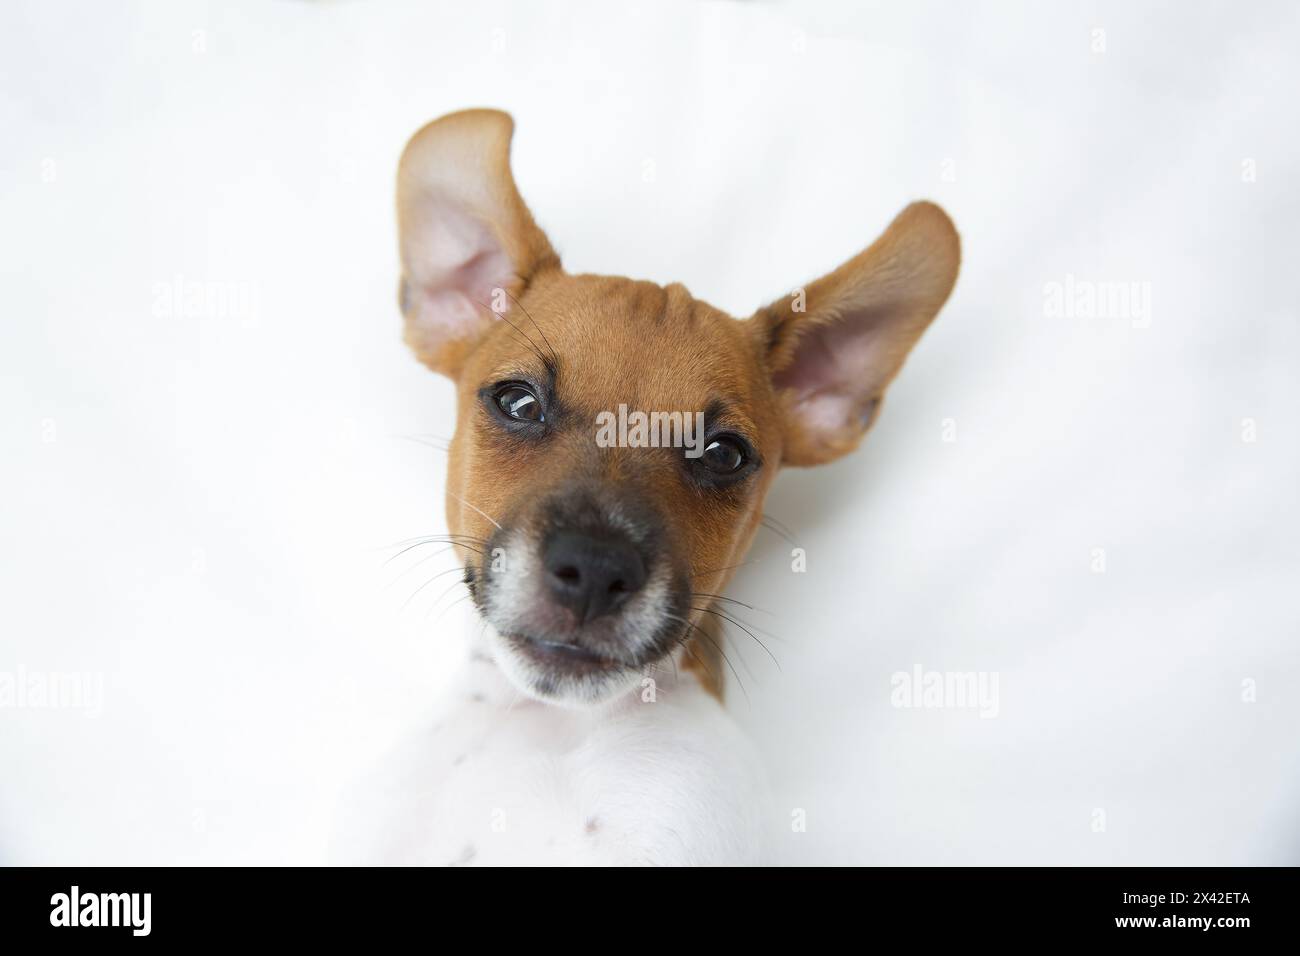 Jack Russell Terrier Puppy 2 months old close up head Stock Photo